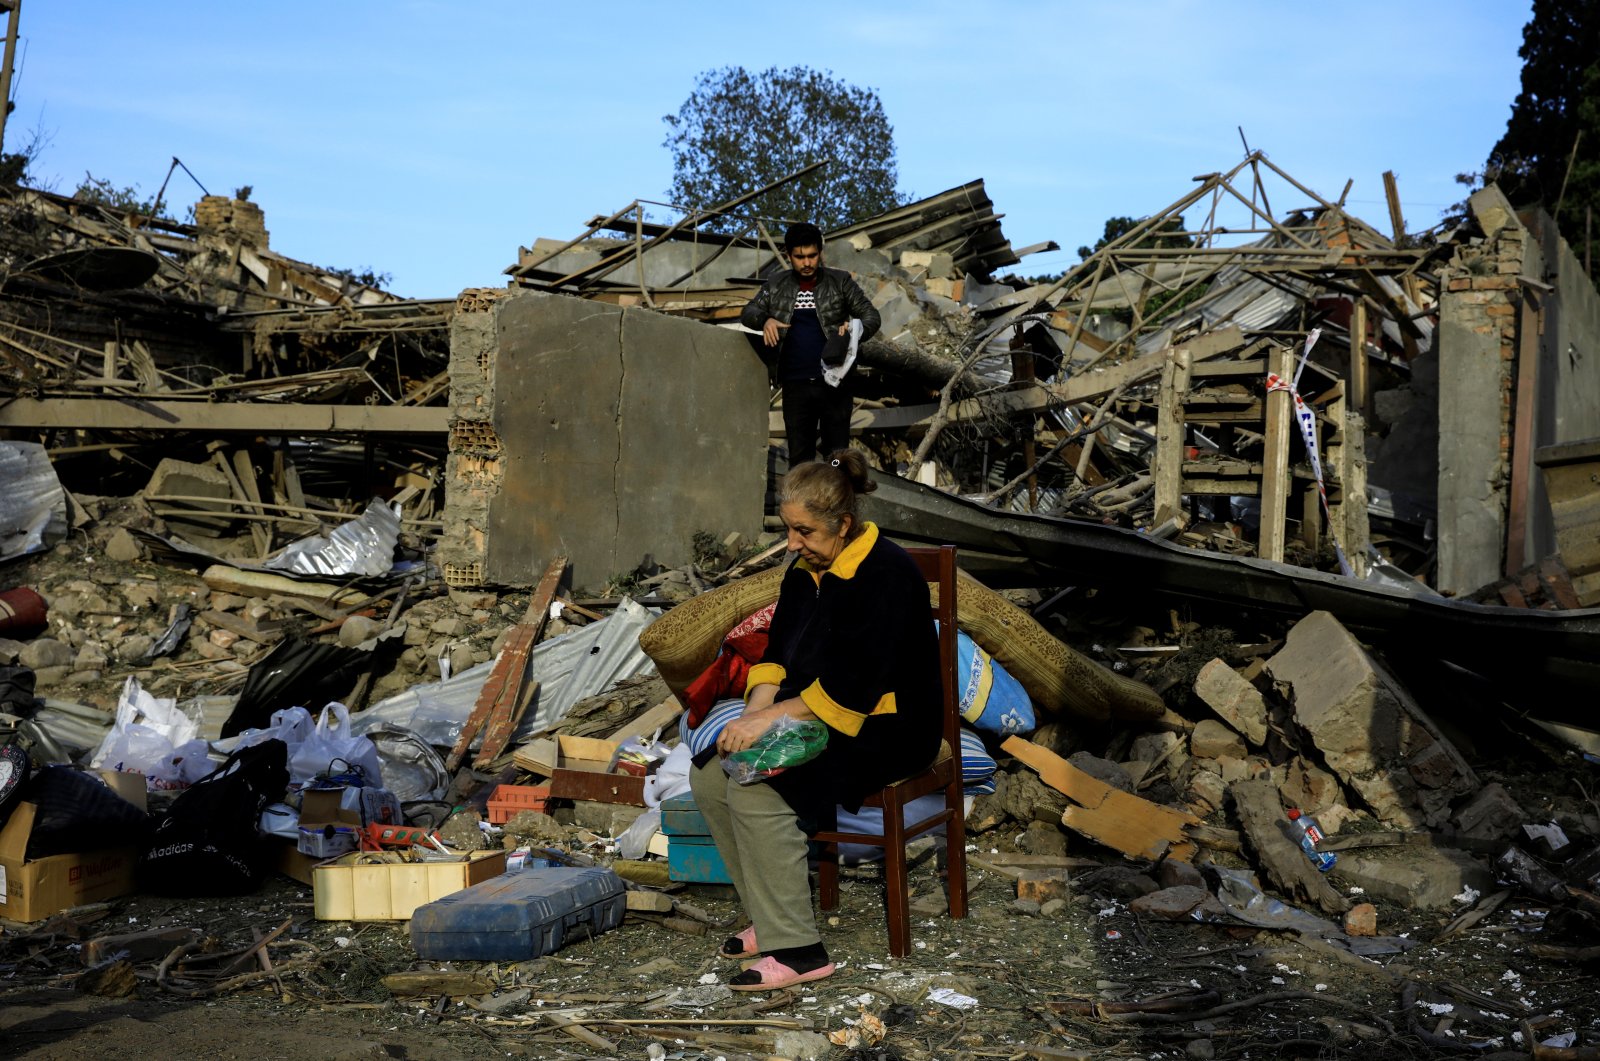 Vesile Mehmedova sits in front of the debris of her brother's home as her relatives search for belongings, at a blast site hit by an Armenian rocket in the city of Ganja, Azerbaijan, Oct. 11, 2020. (Reuters Photo)